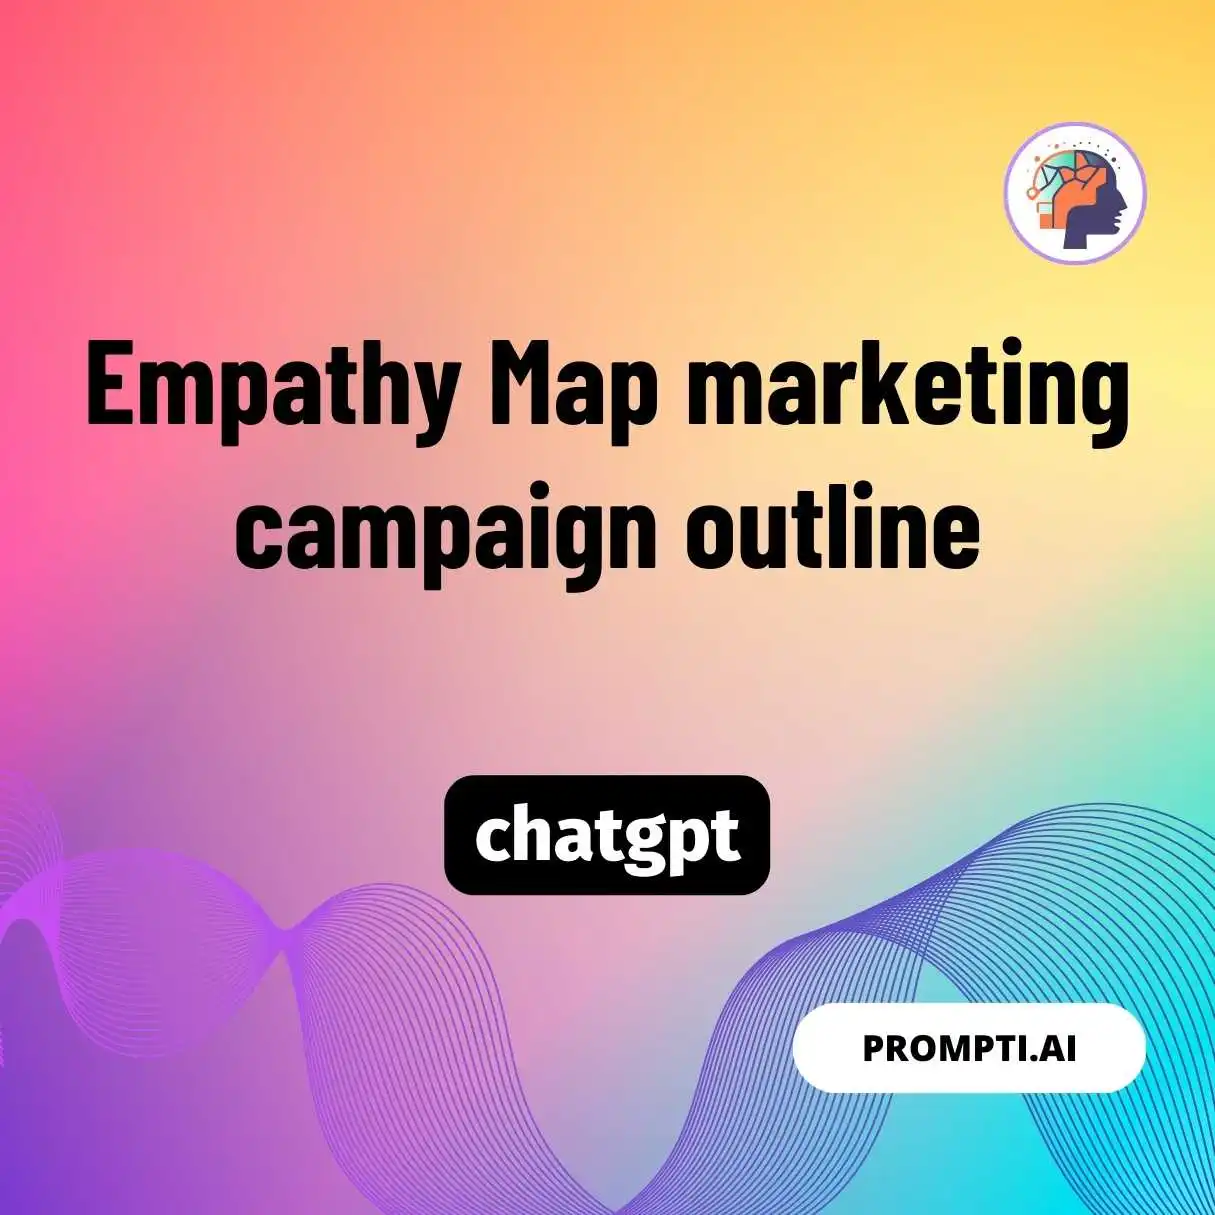 Empathy Map marketing campaign outline